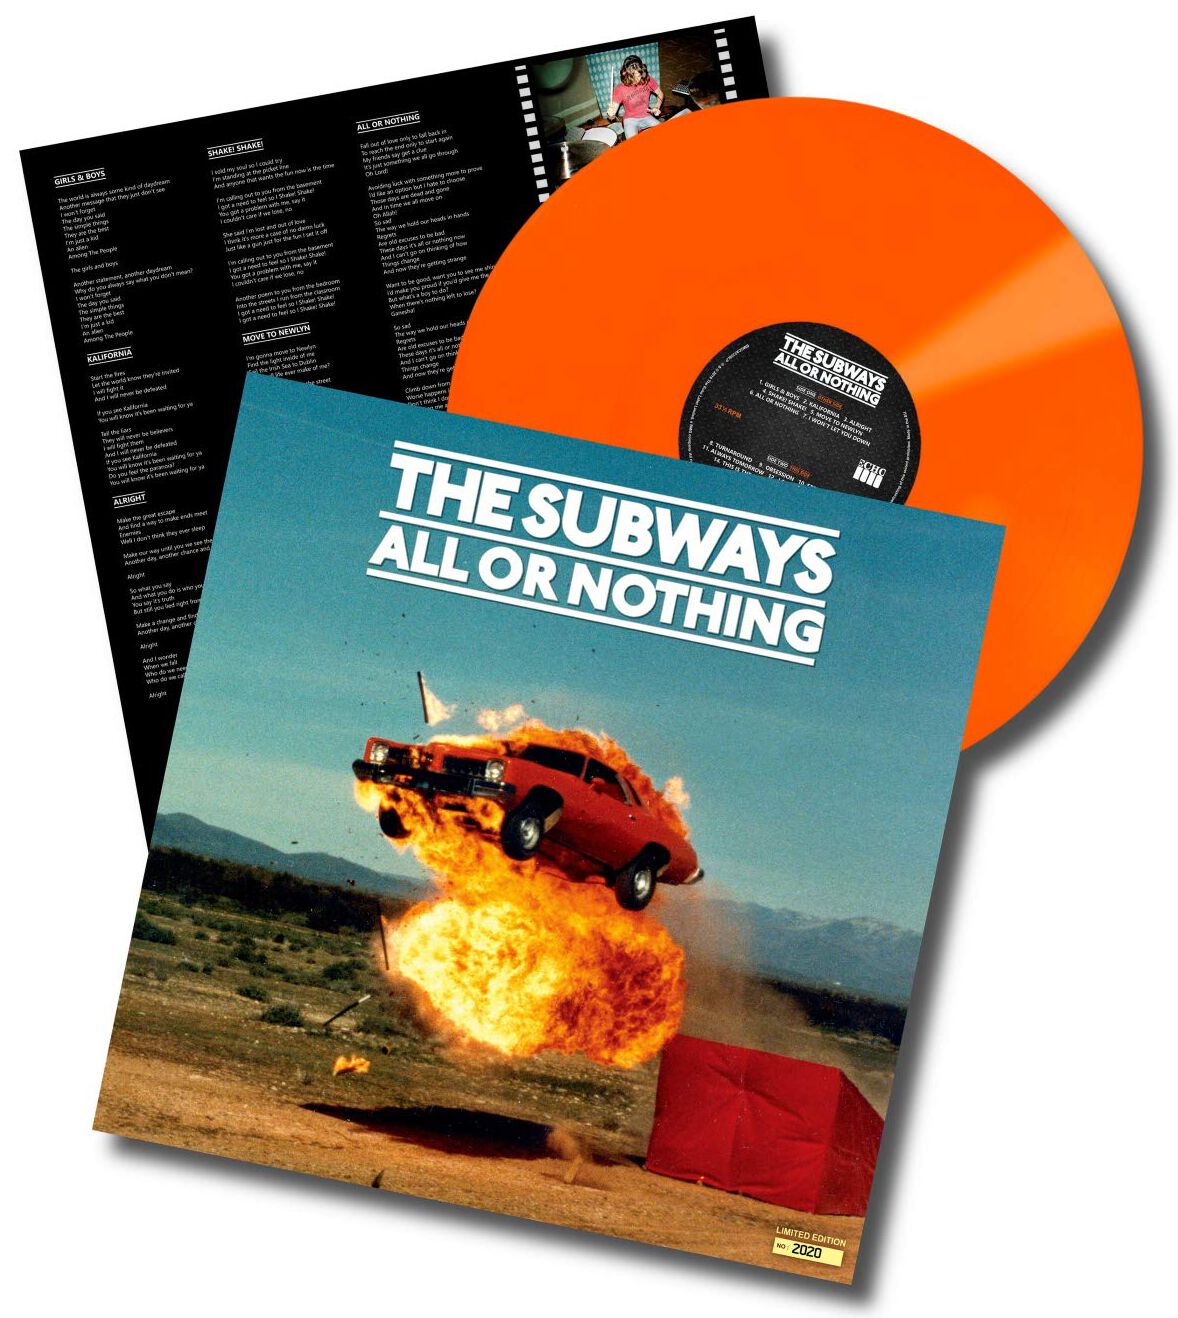 The Subways All or nothing LP multicolor